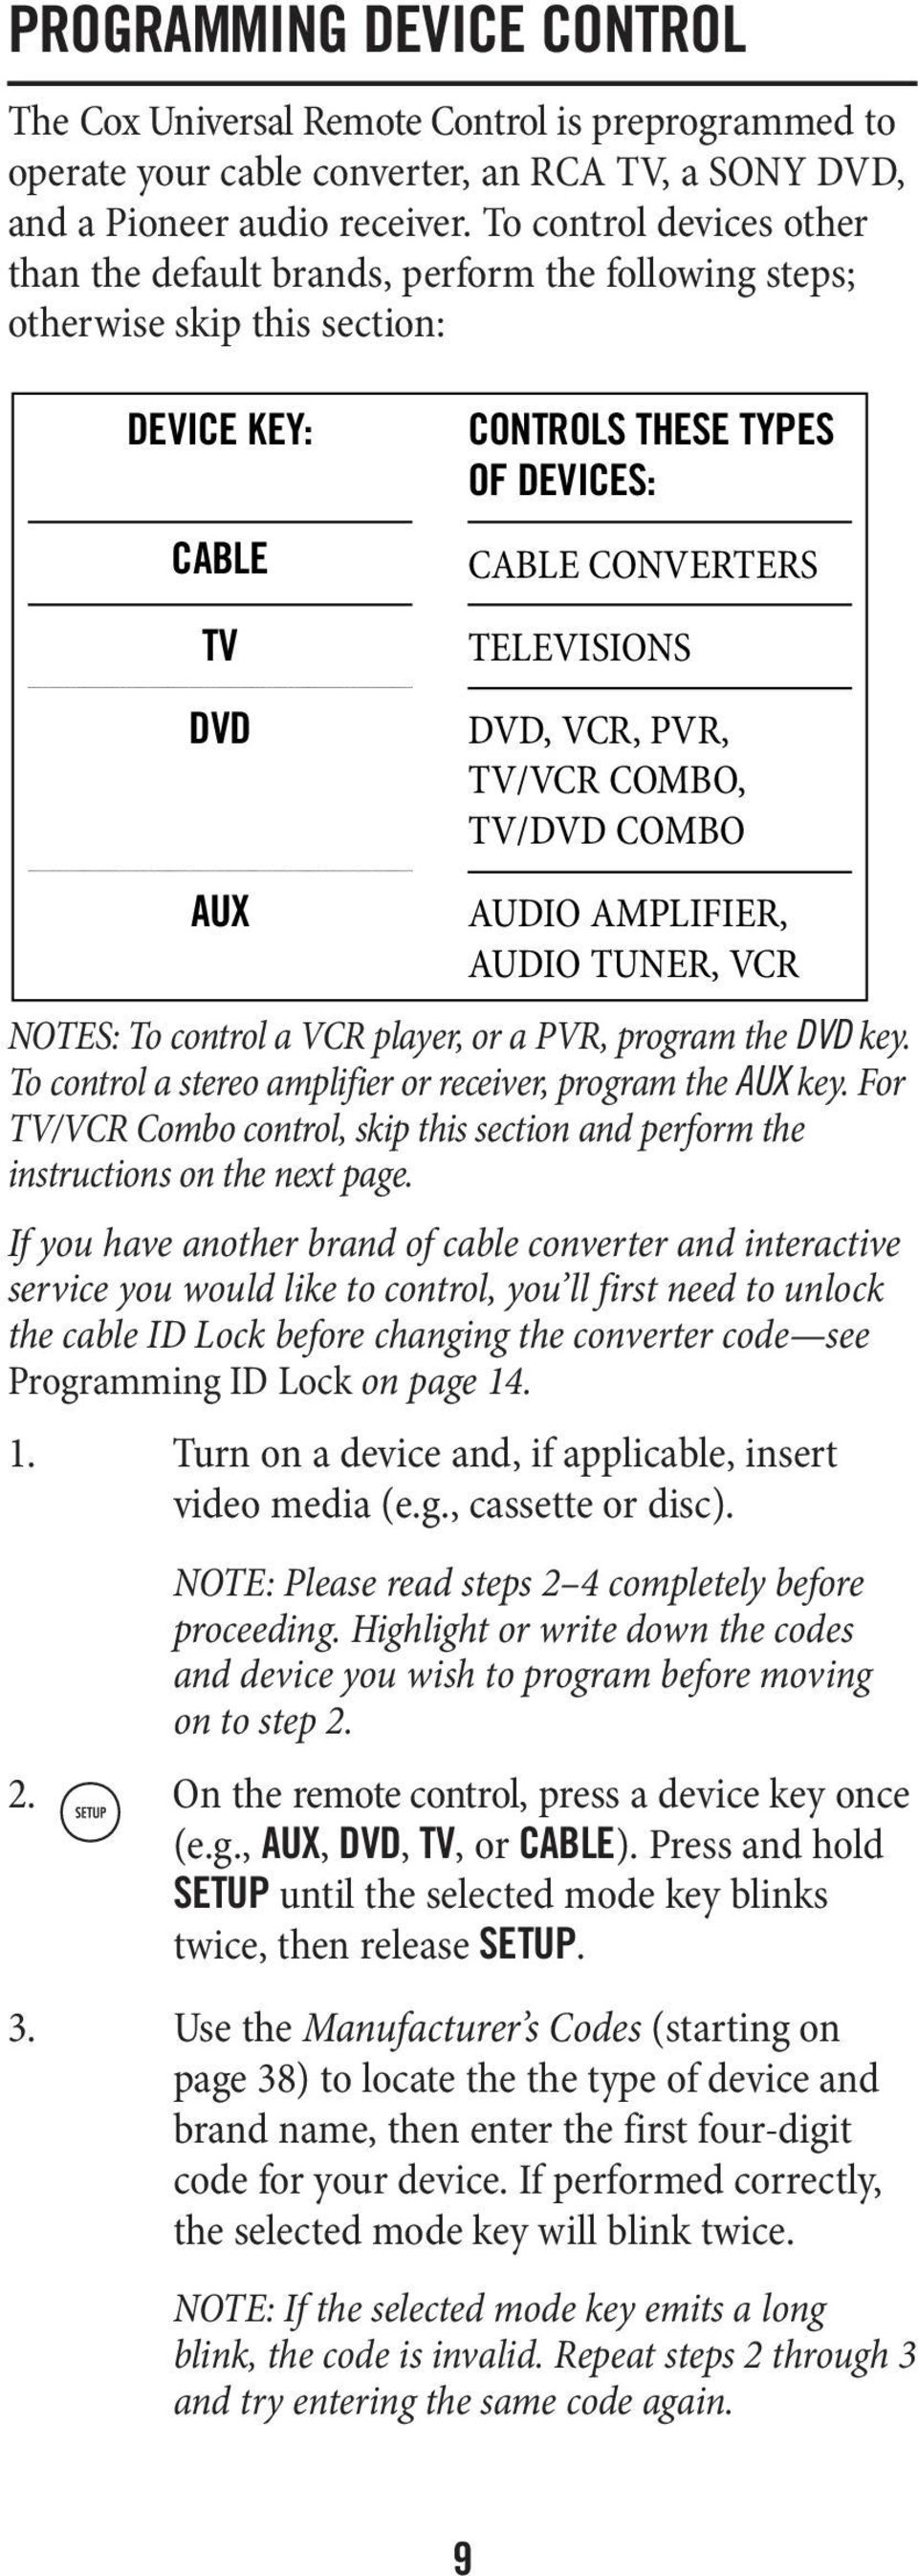 DVD, VCR, PVR, TV/VCR COMBO, TV/DVD COMBO AUDIO AMPLIFIER, AUDIO TUNER, VCR NOTES: To control a VCR player, or a PVR, program the DVD key.